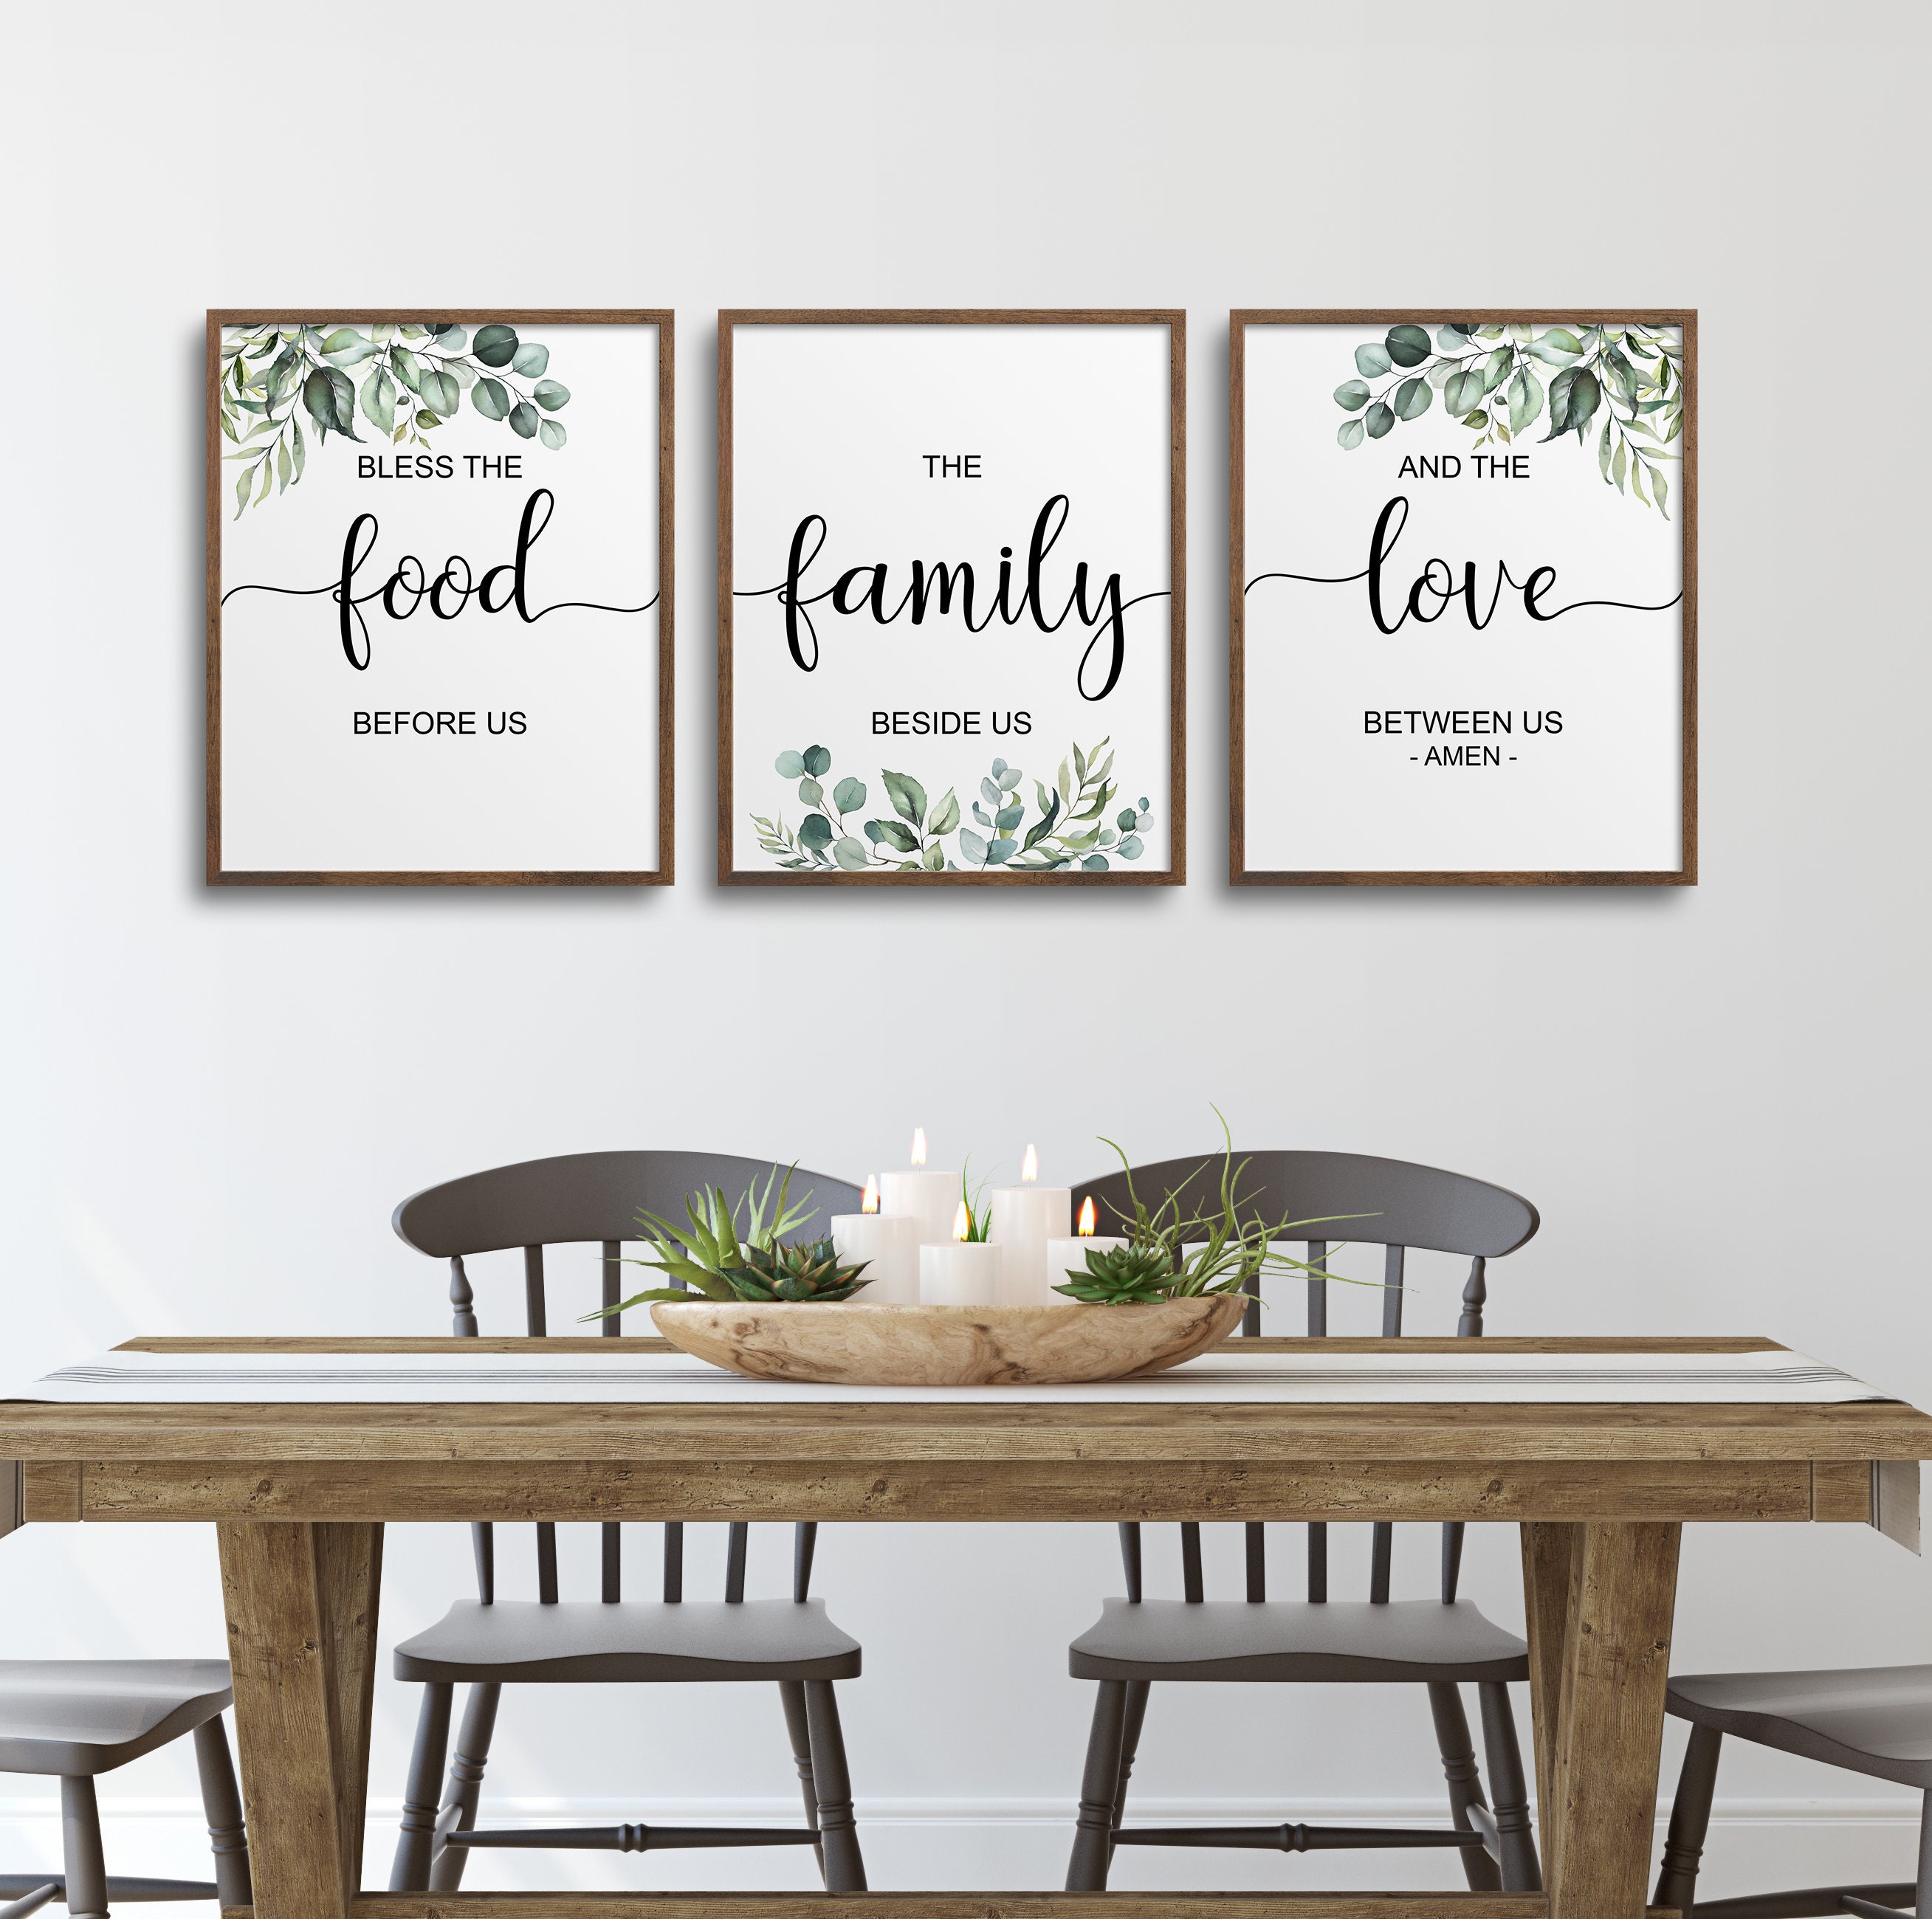 Bless the Food Before Us Prints Dining Room Decor Kitchen - Etsy